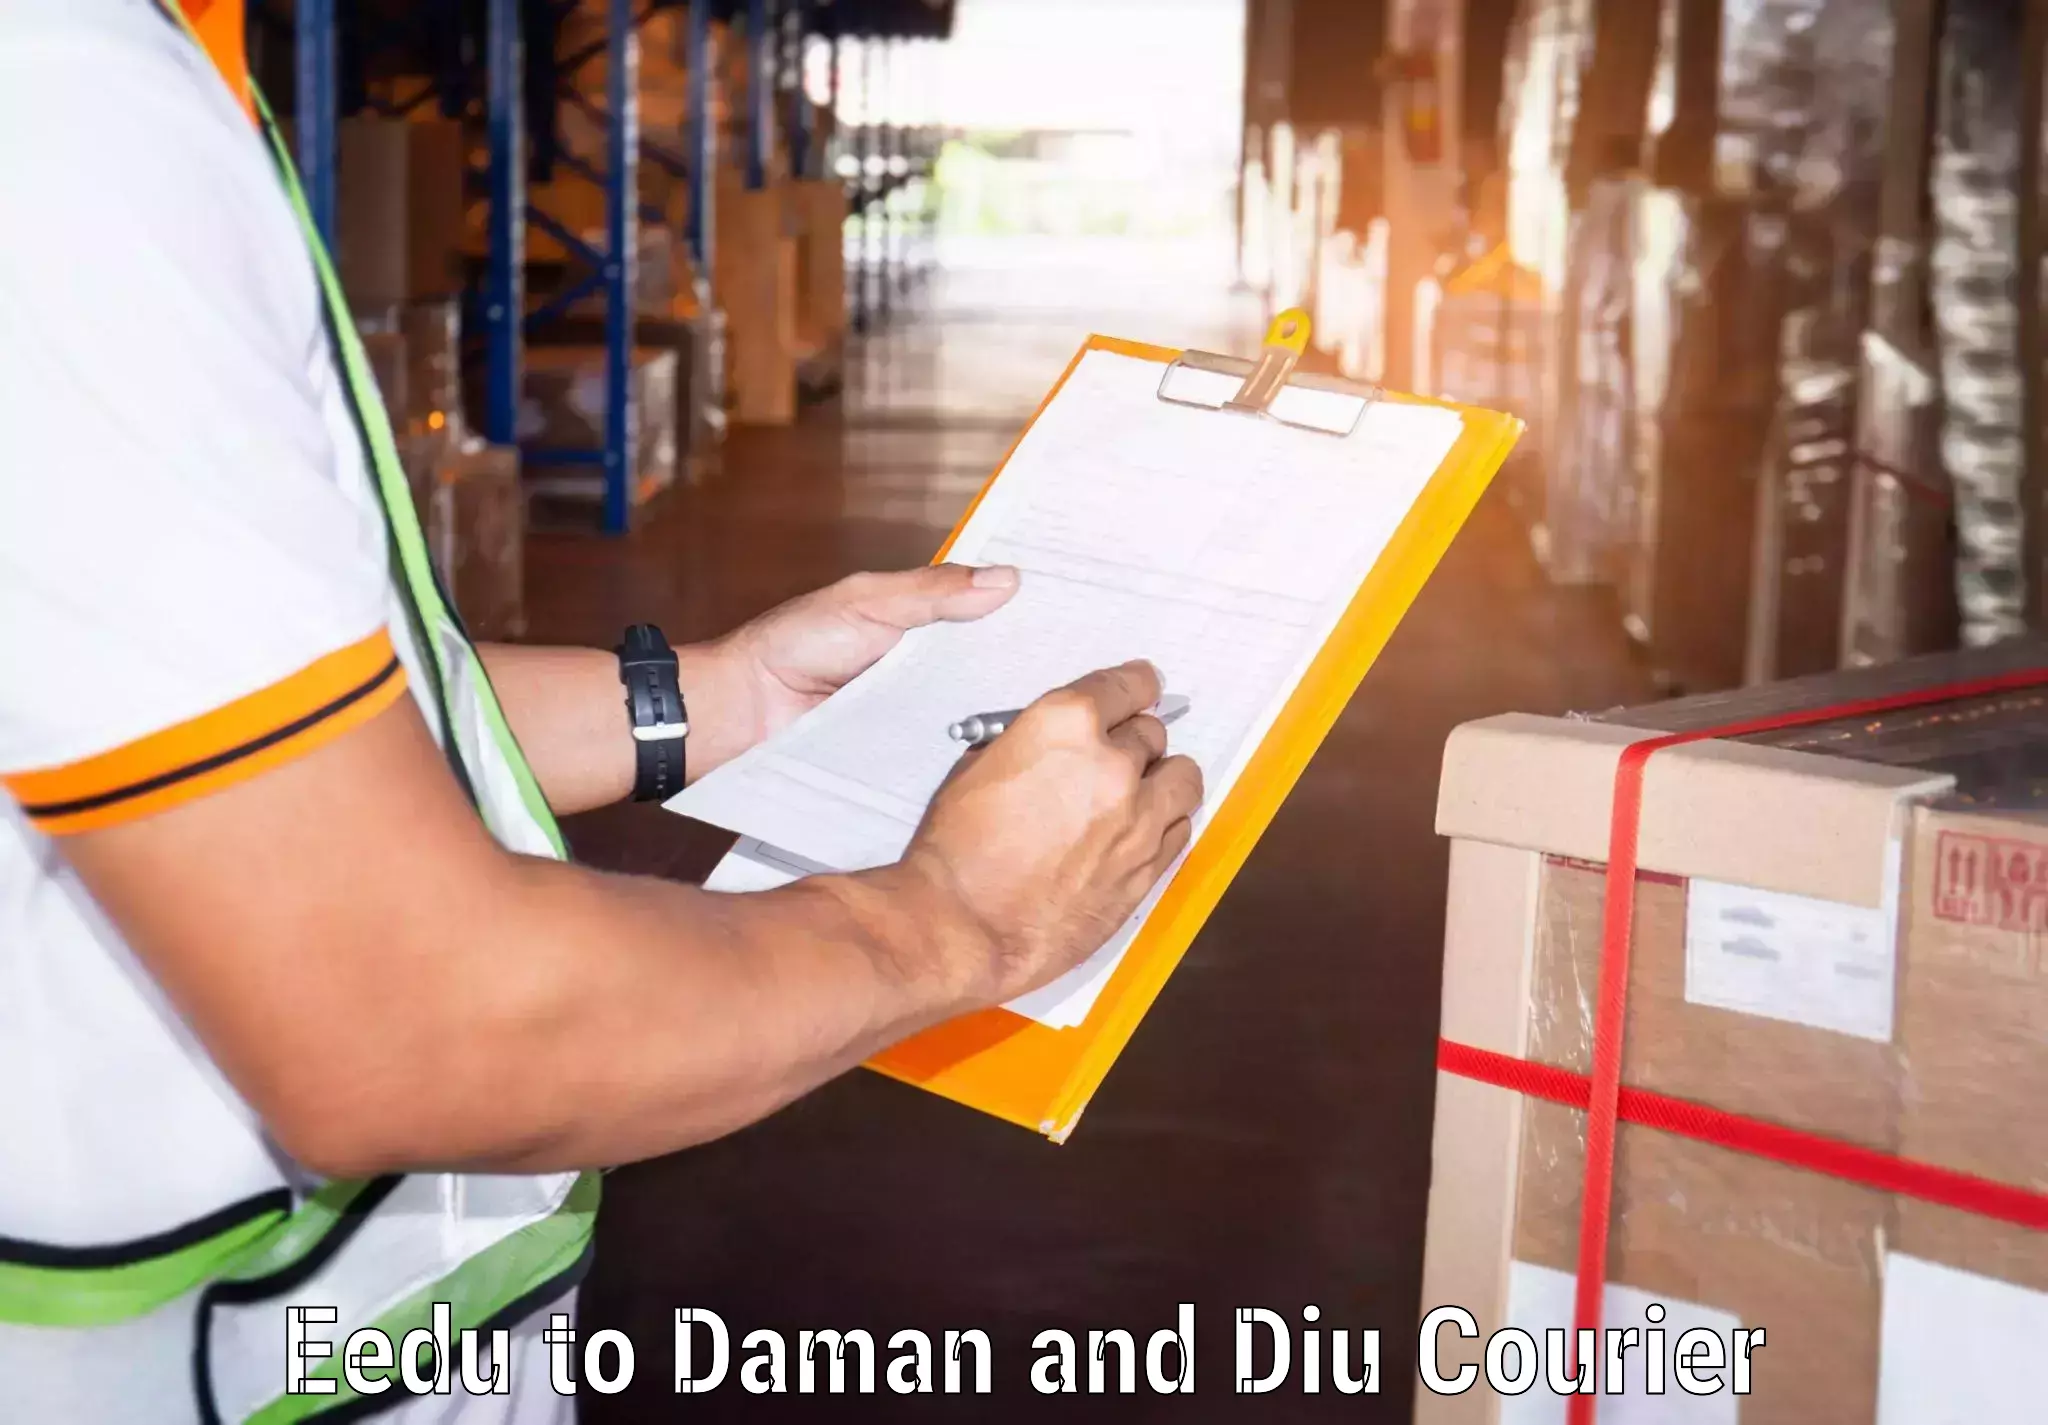 Automated parcel services Eedu to Daman and Diu